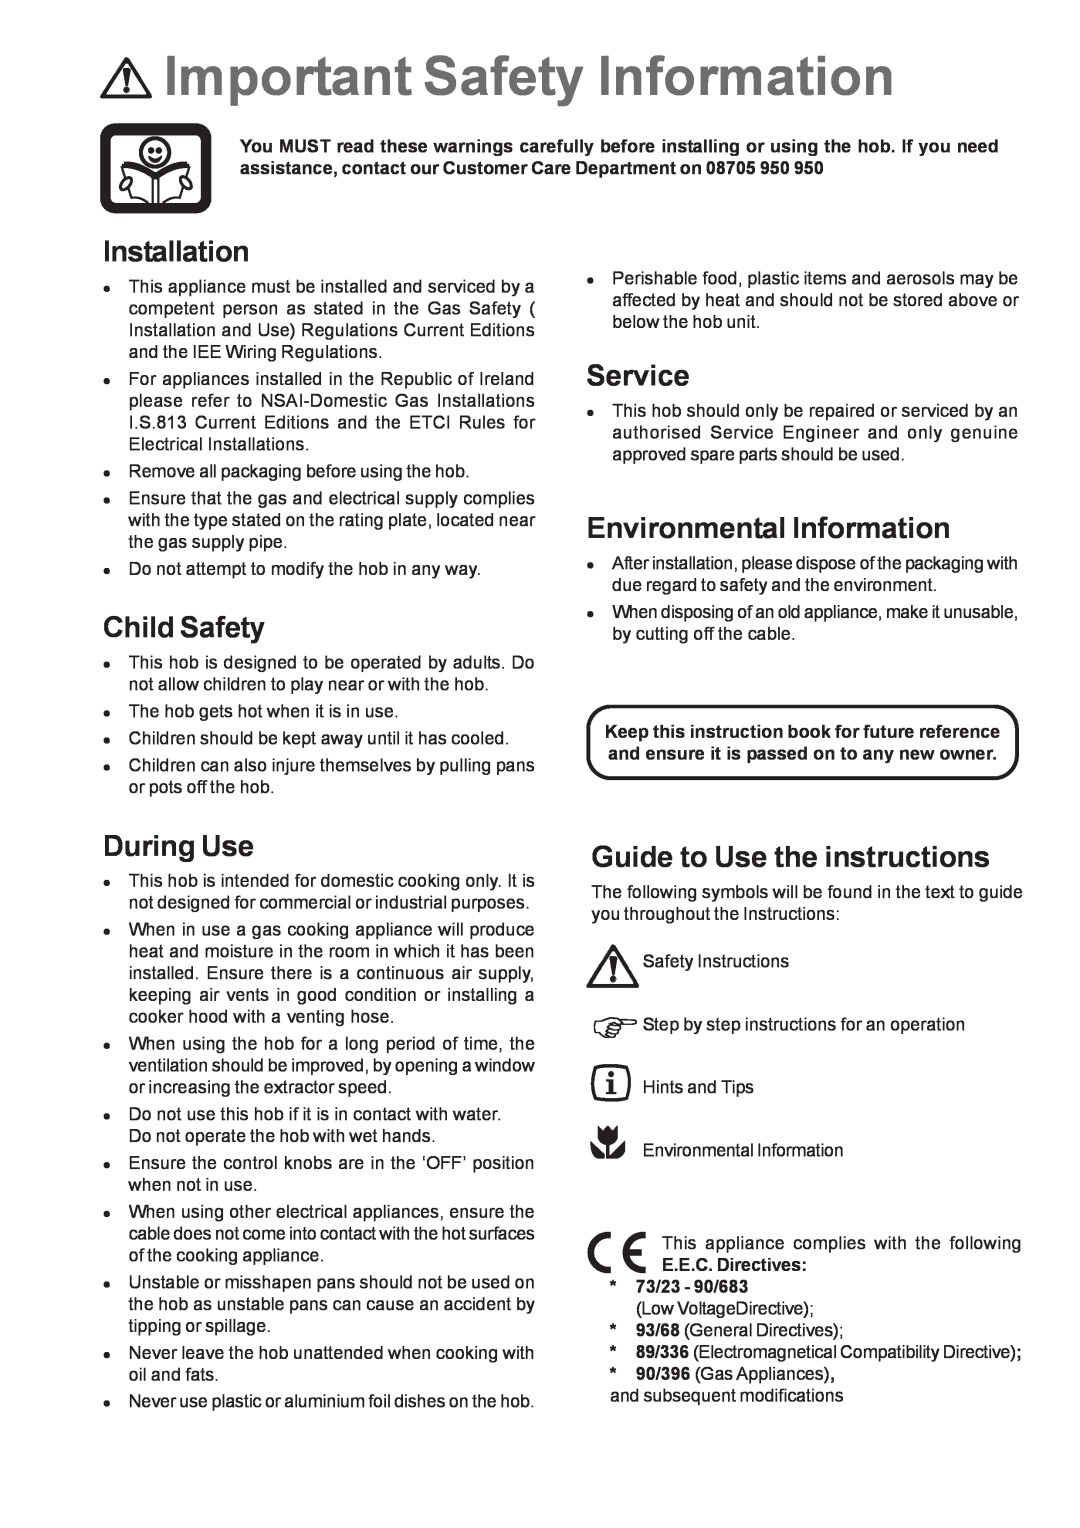 Electrolux EHG 6762 manual Important Safety Information, Installation, Child Safety, Service, Environmental Information 